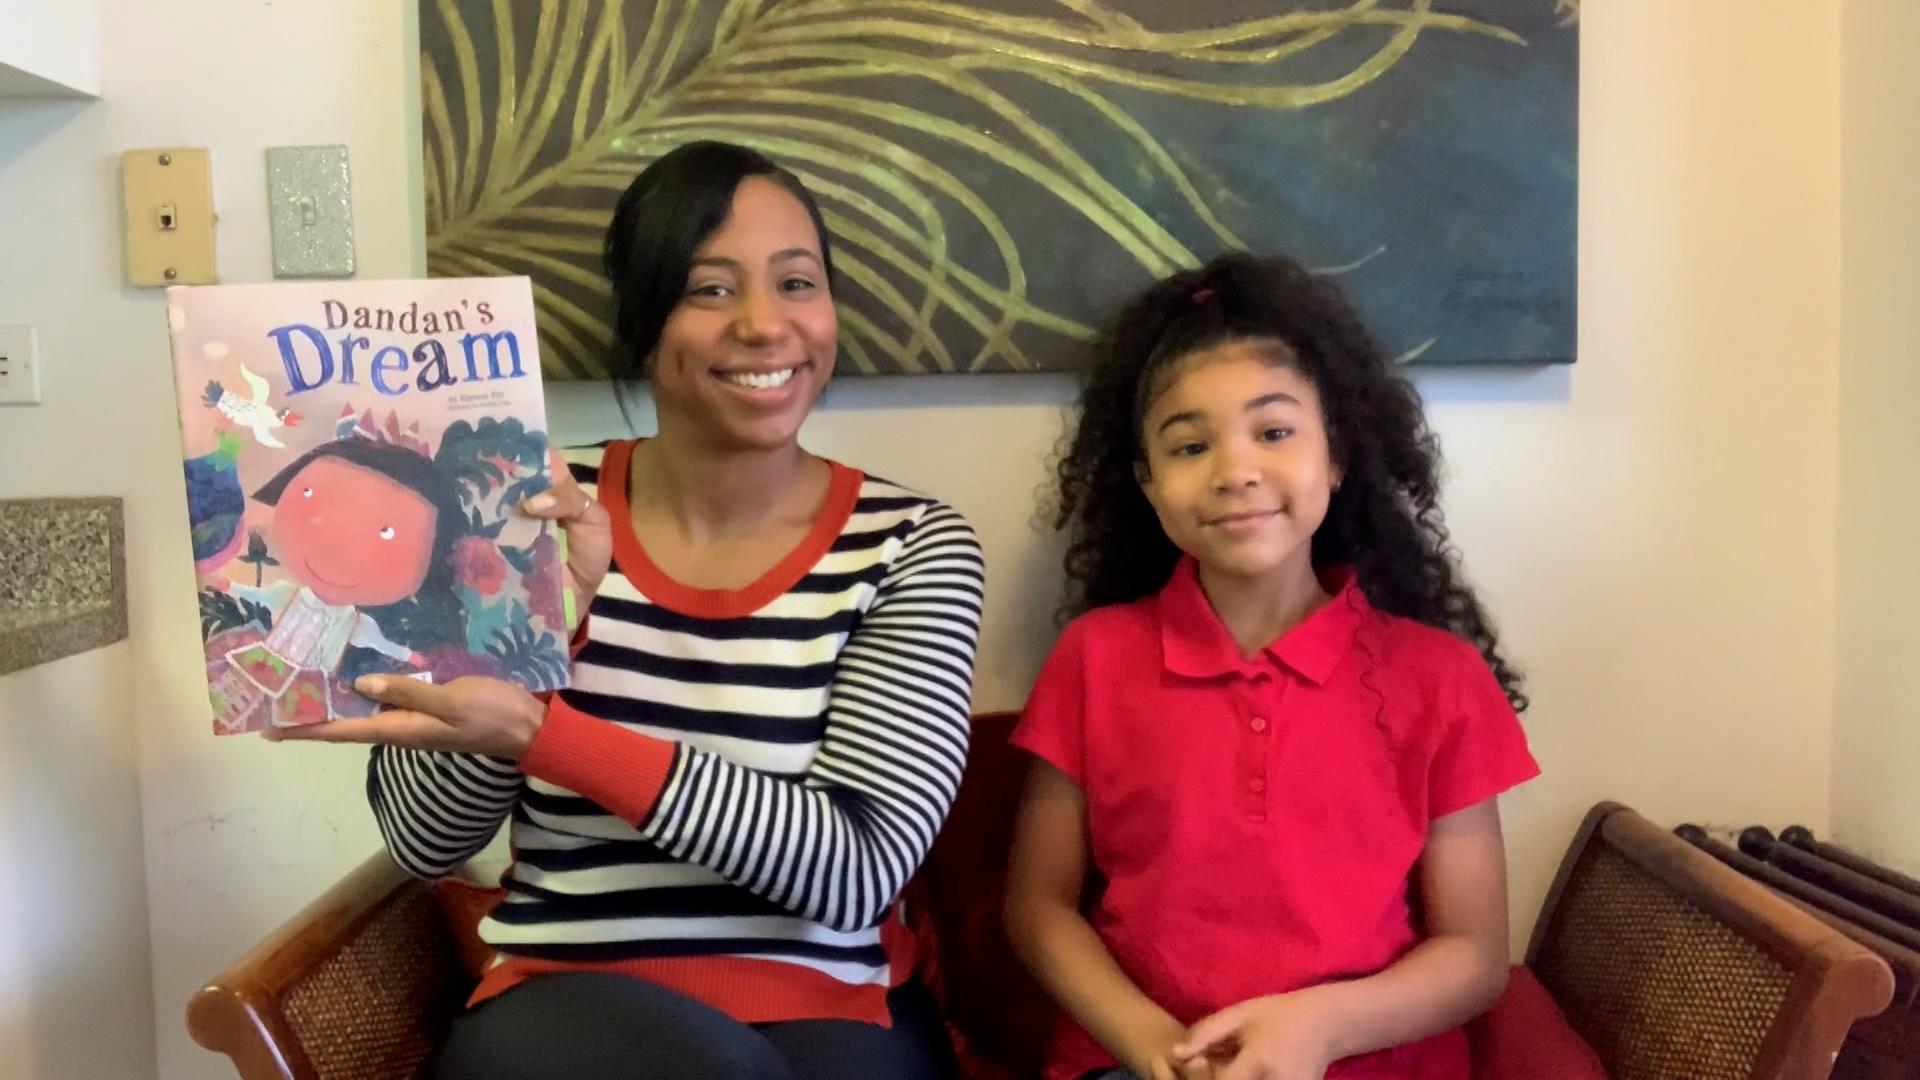 A Black woman on in a striped shirt and a Black girl in a red shirt sit on a couch and hold up a children's book.